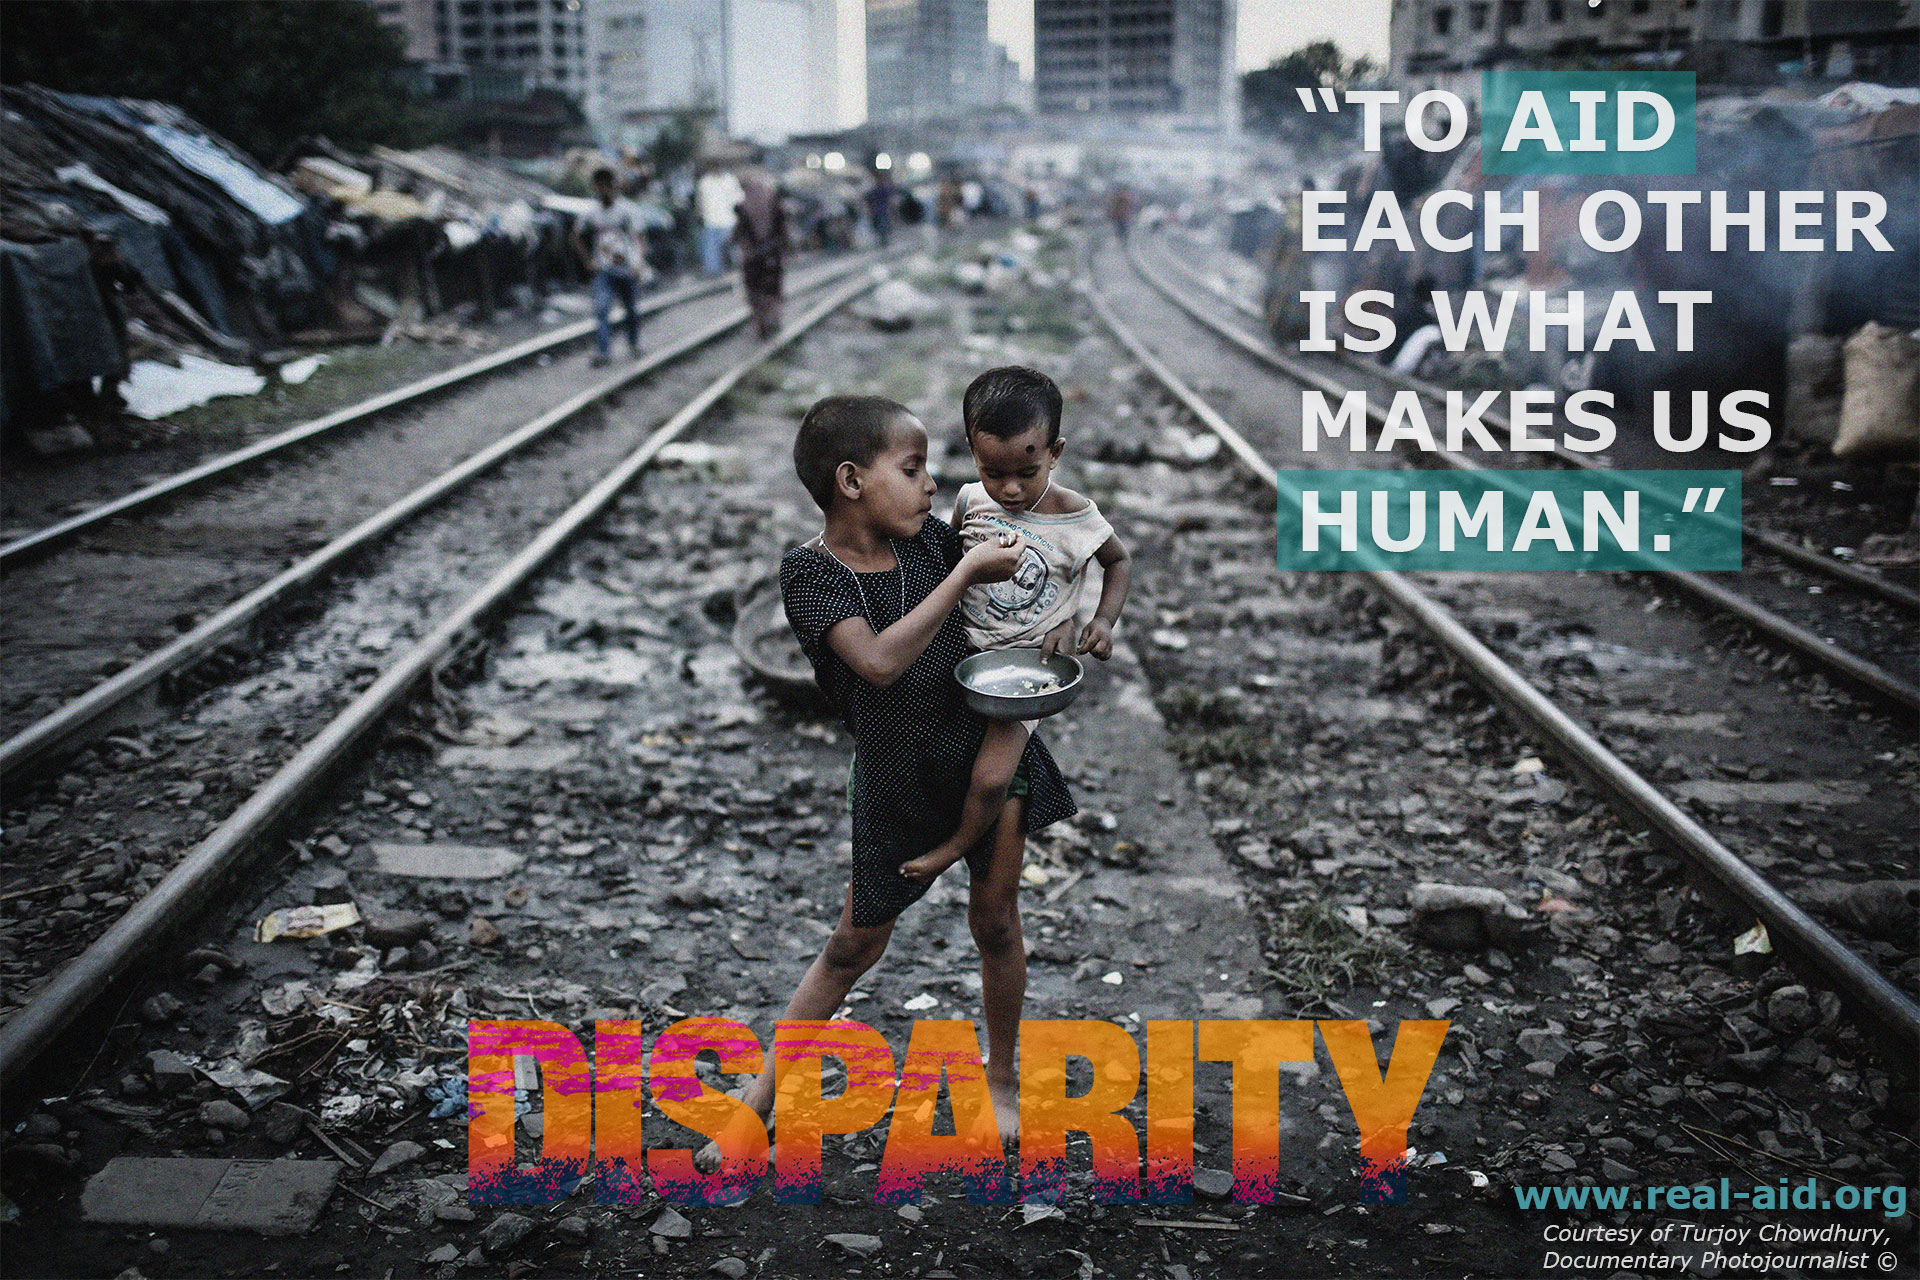 Disparity Film Poster, to aid each other is what makes us human text, boy feeding younger boy on train tracks image